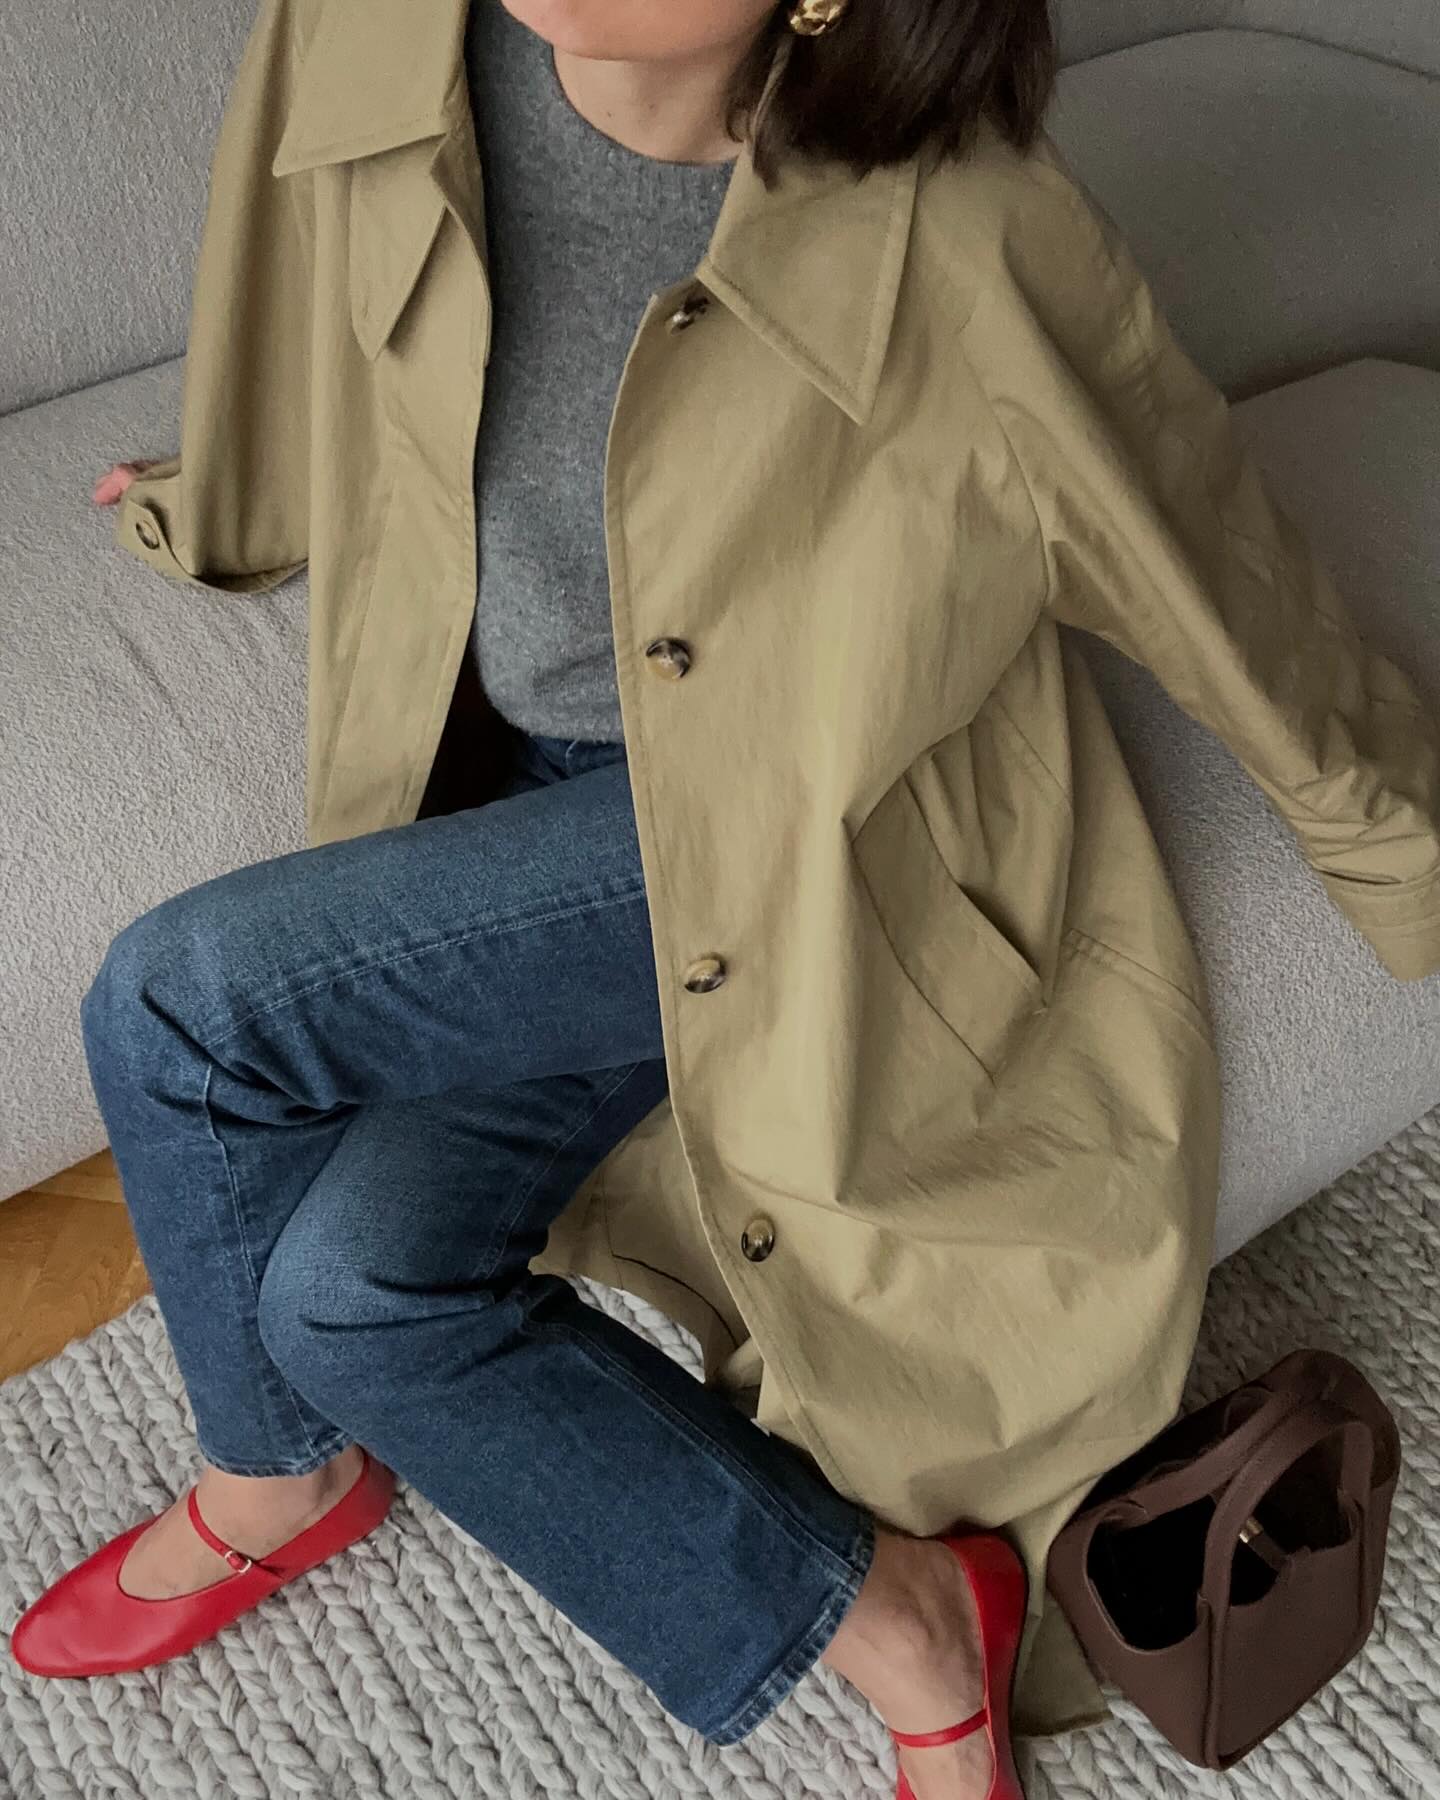 a female fashion influencer poses on a gray sofa wearing an effortless outfit with a trench coat, gray sweater, straight-leg jeans, and red Mary Jane flats